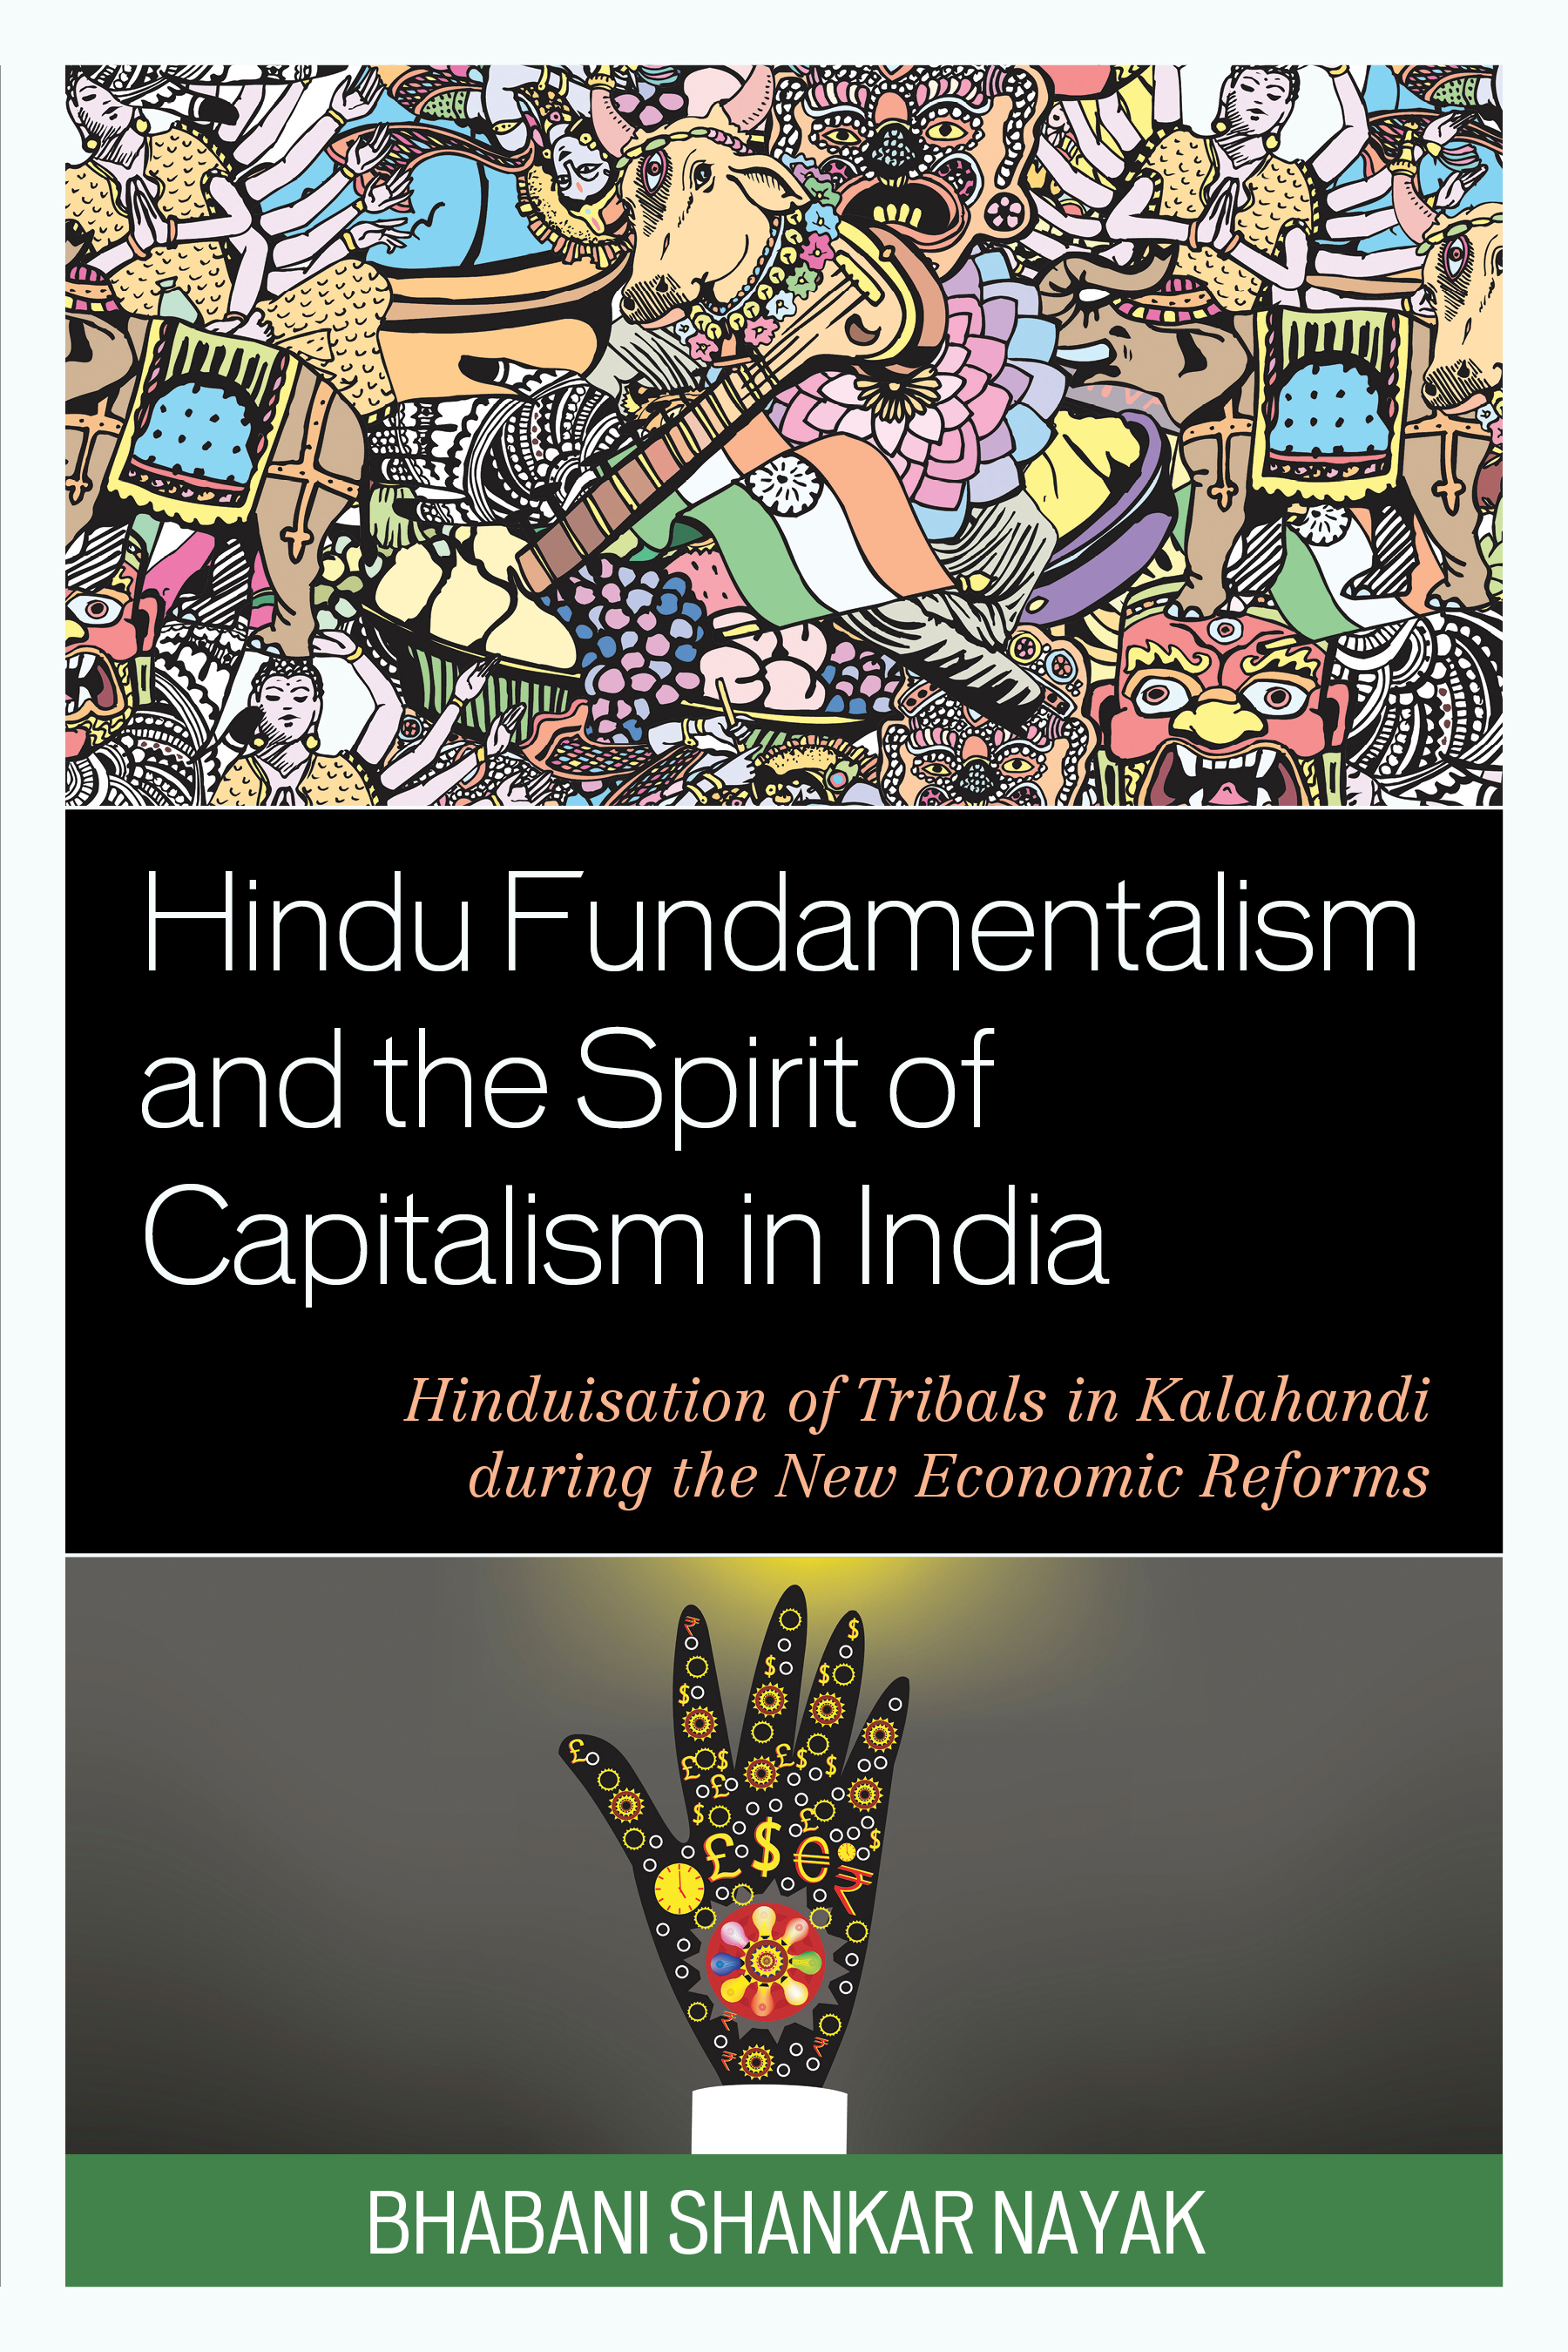 Hindu Fundamentalism and the Spirit of Capitalism in India: Hinduisation of Tribals in Kalahandi during the New Economic Reforms